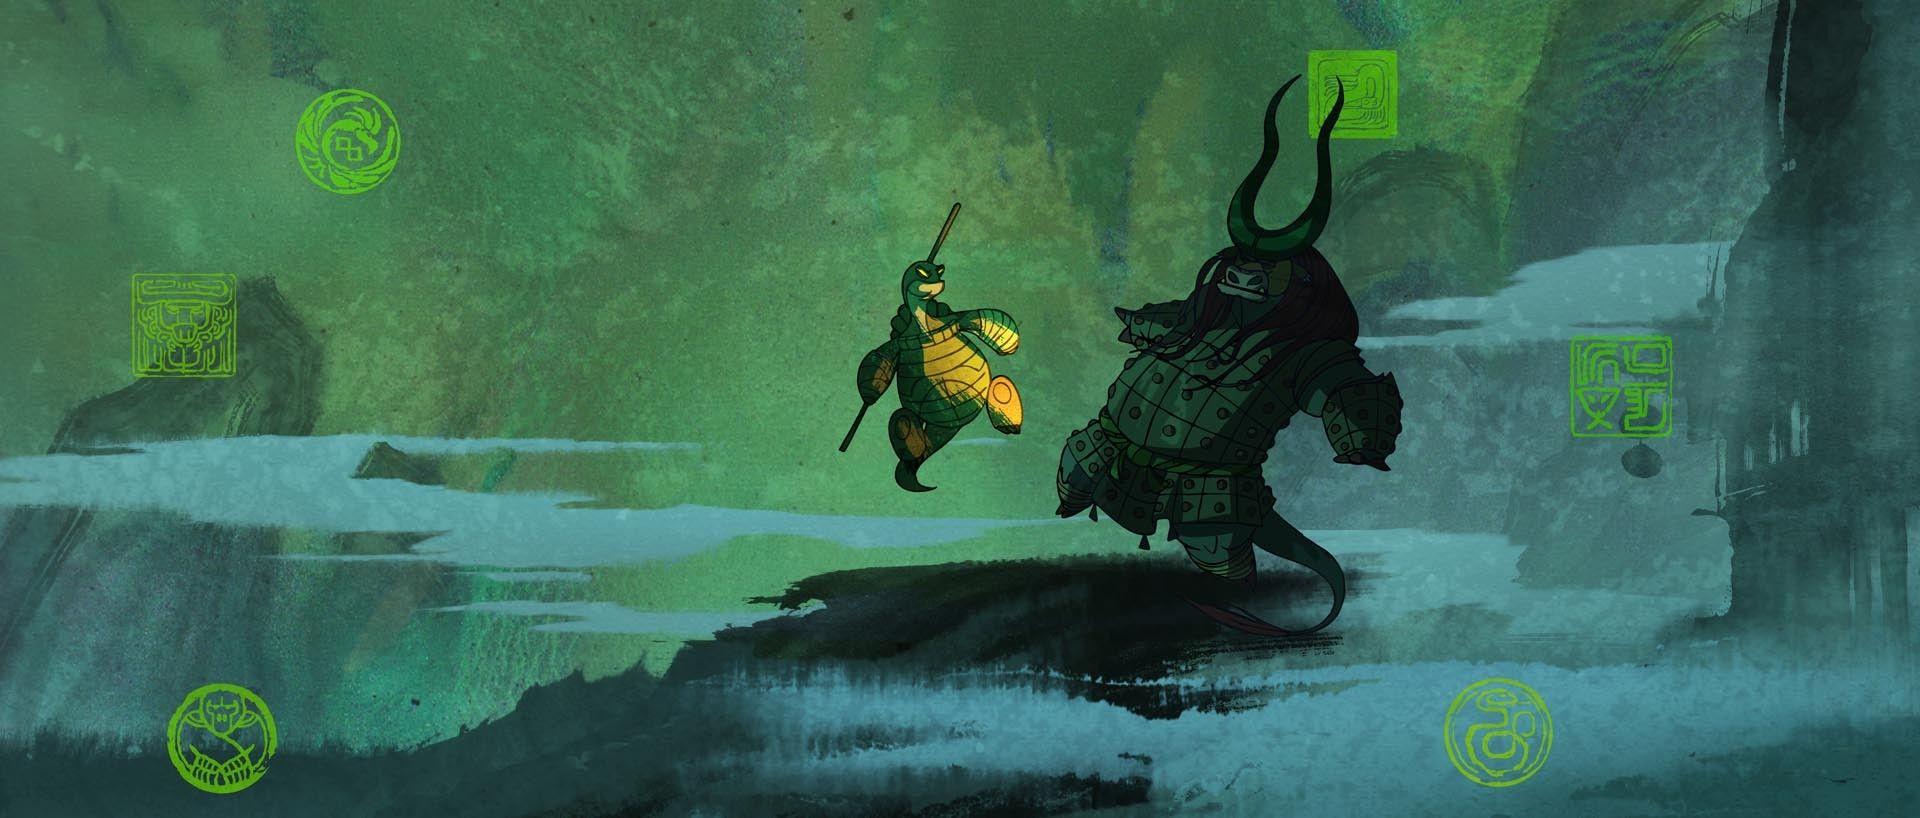 See the early concepts for Kung Fu Panda 3